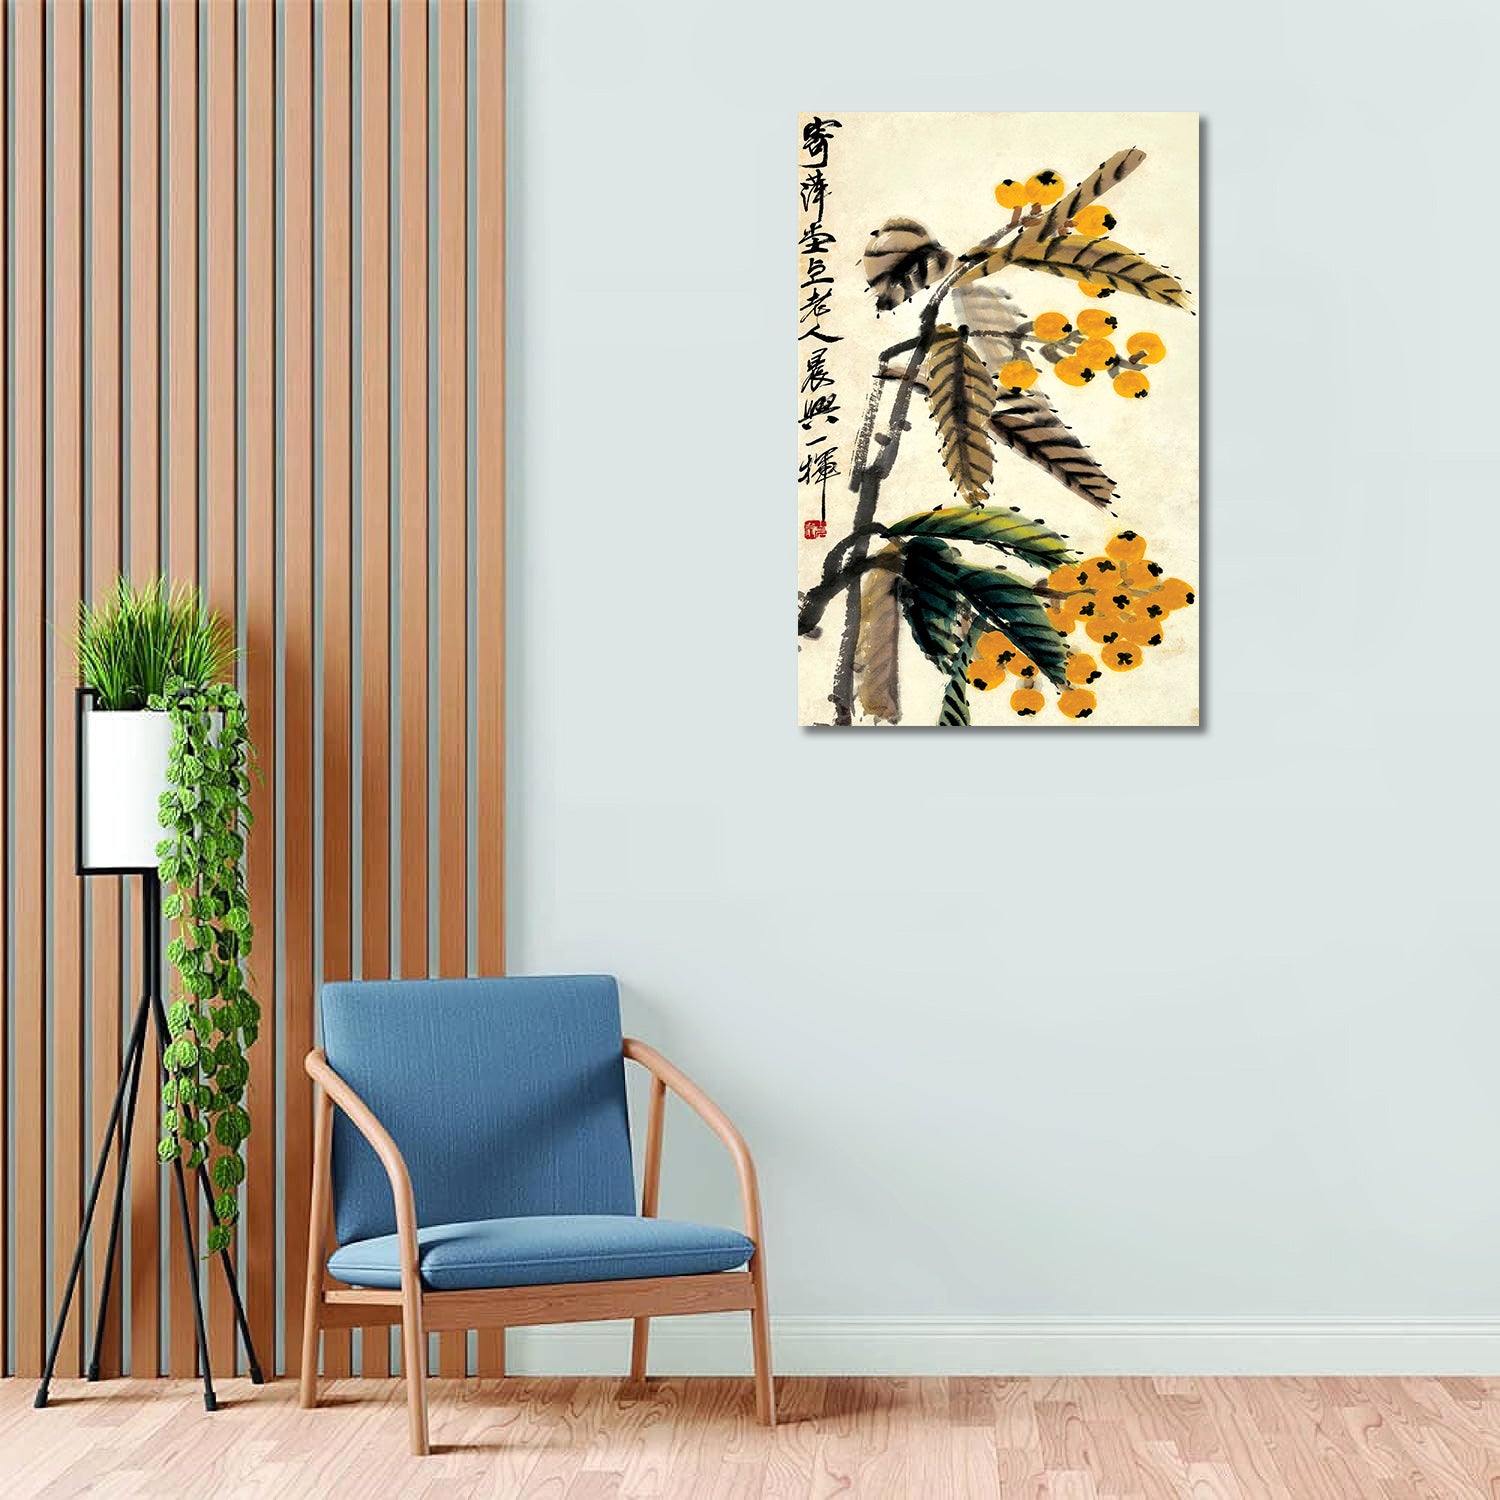 Japanese Art The evergreen tree - Unframed Canvas Painting